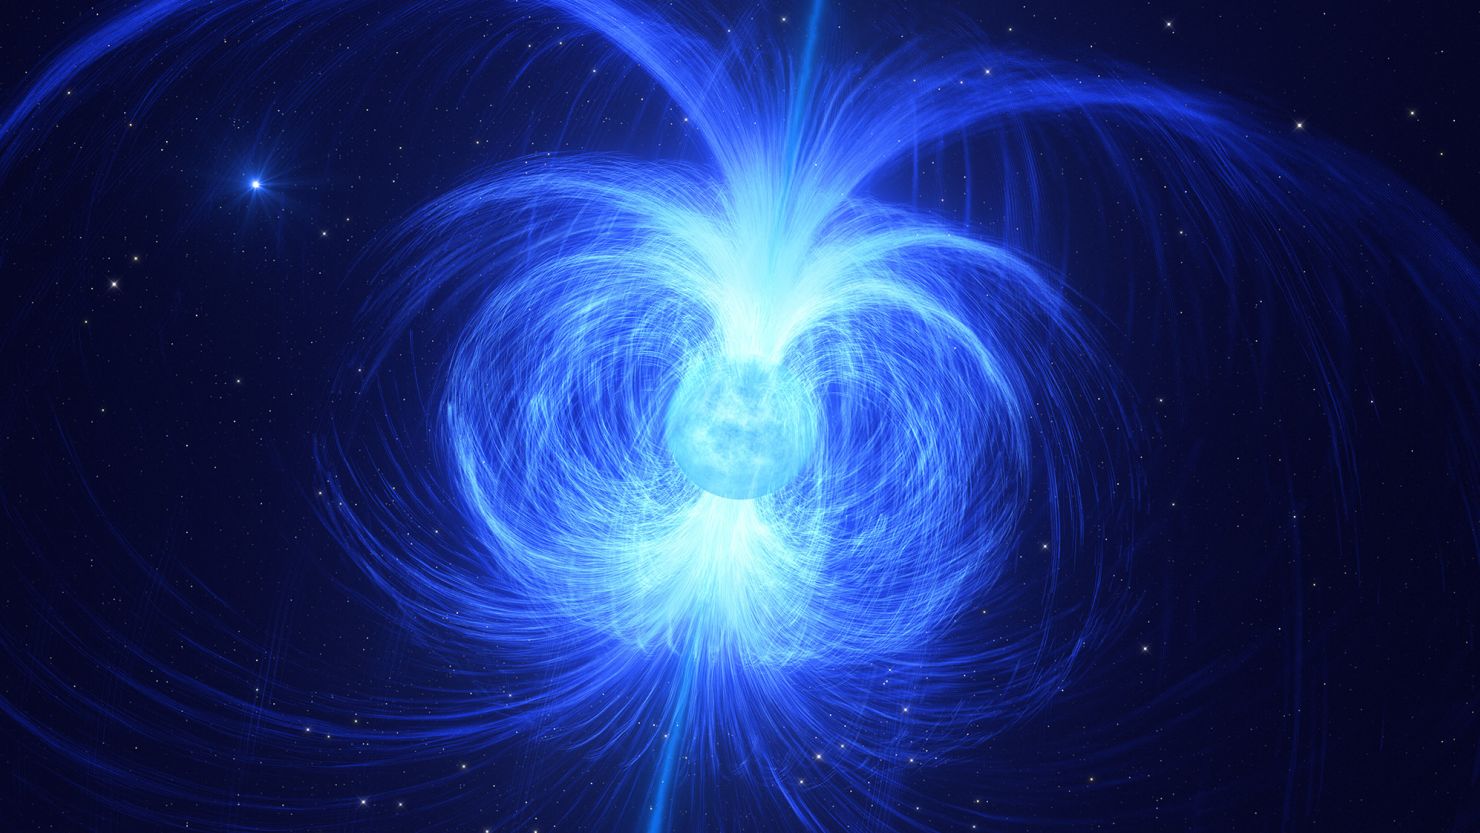 This artist impression shows HD 45166, a massive star recently discovered to have a powerful magnetic field of 43 000 gauss, the strongest magnetic field ever found in a massive star. Intense winds of particles blowing away from the star are trapped by this magnetic field, enshrouding the star in a gaseous shell as illustrated here. Astronomers believe that this star will end its life as a magnetar, a compact and highly magnetic stellar corpse. As HD 45166 collapses under its own gravity, its magnetic field will strengthen, and the star will eventually become a very compact core with a magnetic field of around 100 trillion gauss — the most powerful type of magnet in the Universe. HD 45166 is part of a binary system. In the background, we get a glimpse of HD 45166's companion, a normal blue star that has been found to orbit at a far larger distance than previously reported.